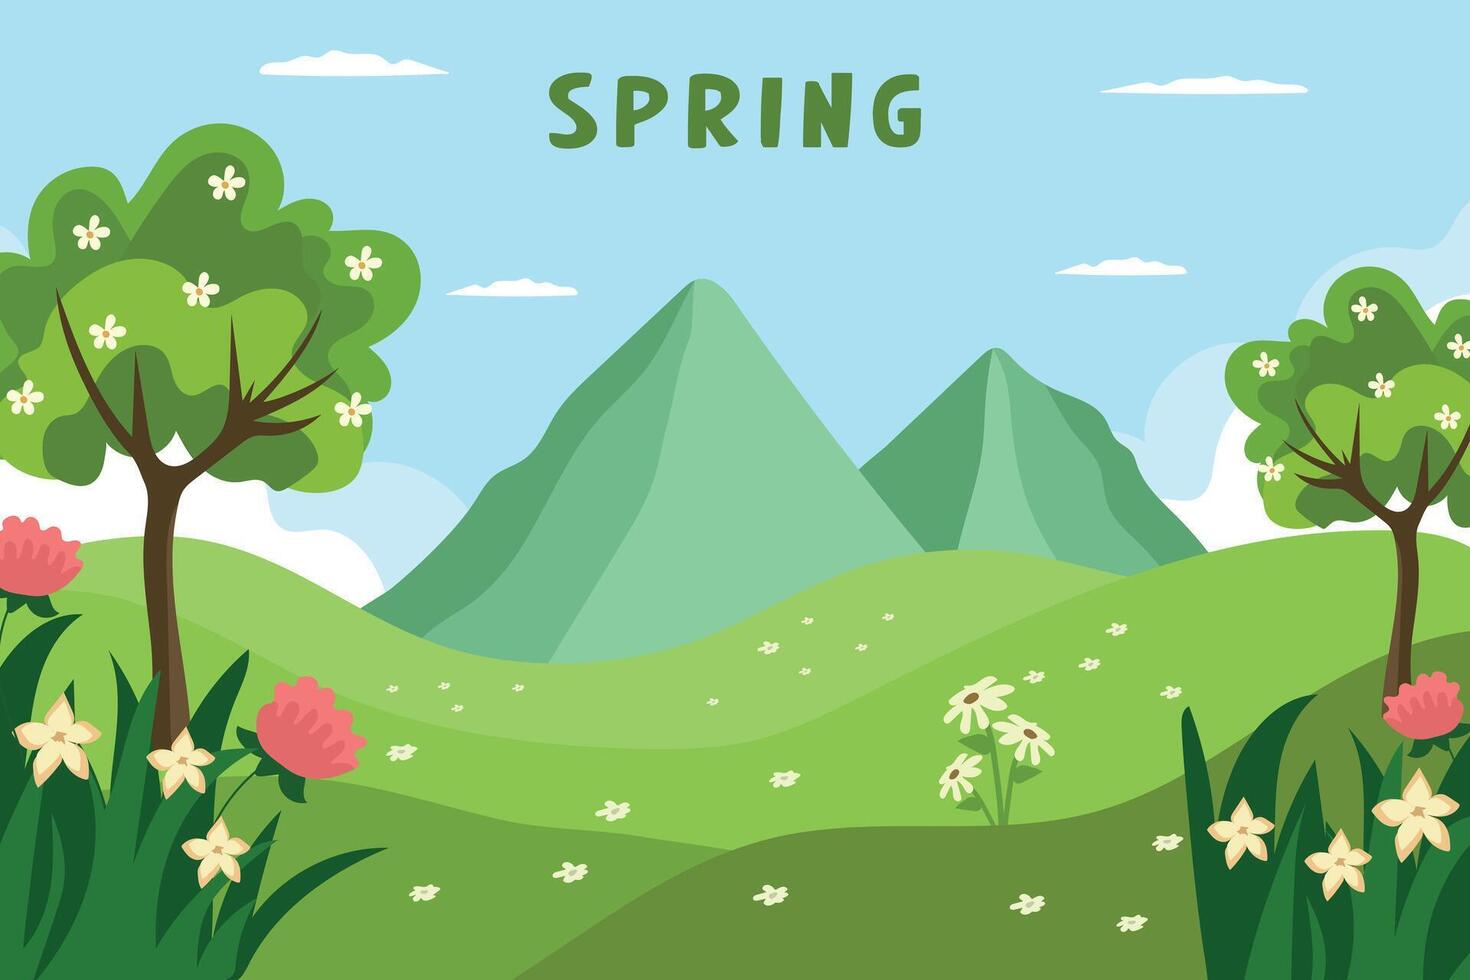 Spring illustration. Spring landscape with flowers, meadow, mountains and trees. vector